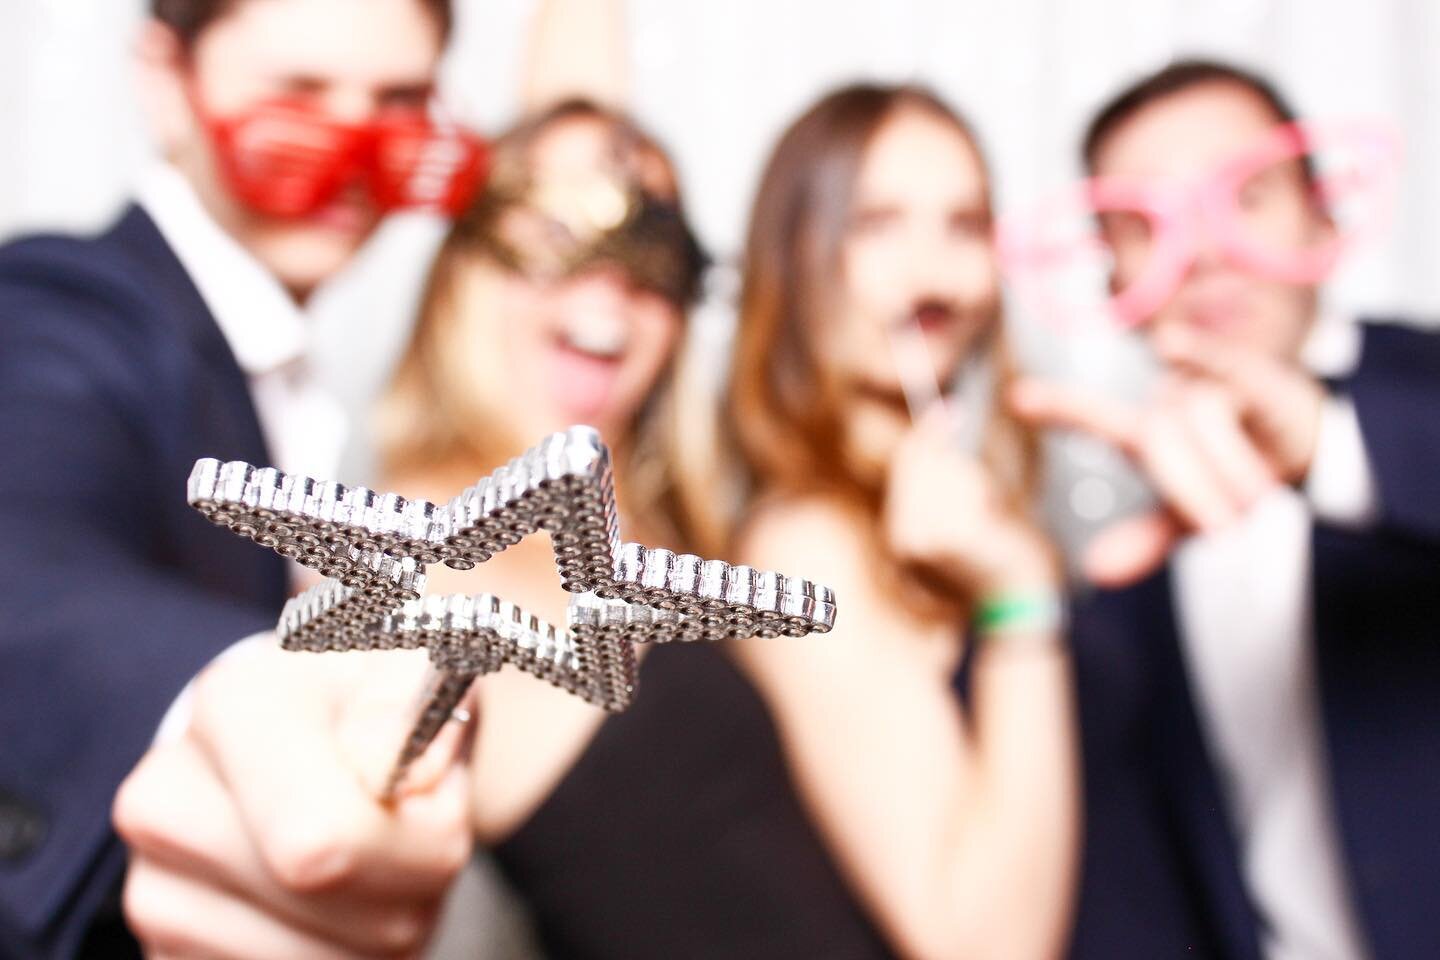 Let us help make, your event magical. 
.⠀
.⠀
#Partycam&nbsp;#photoboothfun#photoboothprops#photoboothwedding#photoboothrental##philadelphiaphotoboothrental#photoboothphiladelphia##phillyphotoboothrental#photoboothphilly#phillyphotobooths&nbsp;#photob